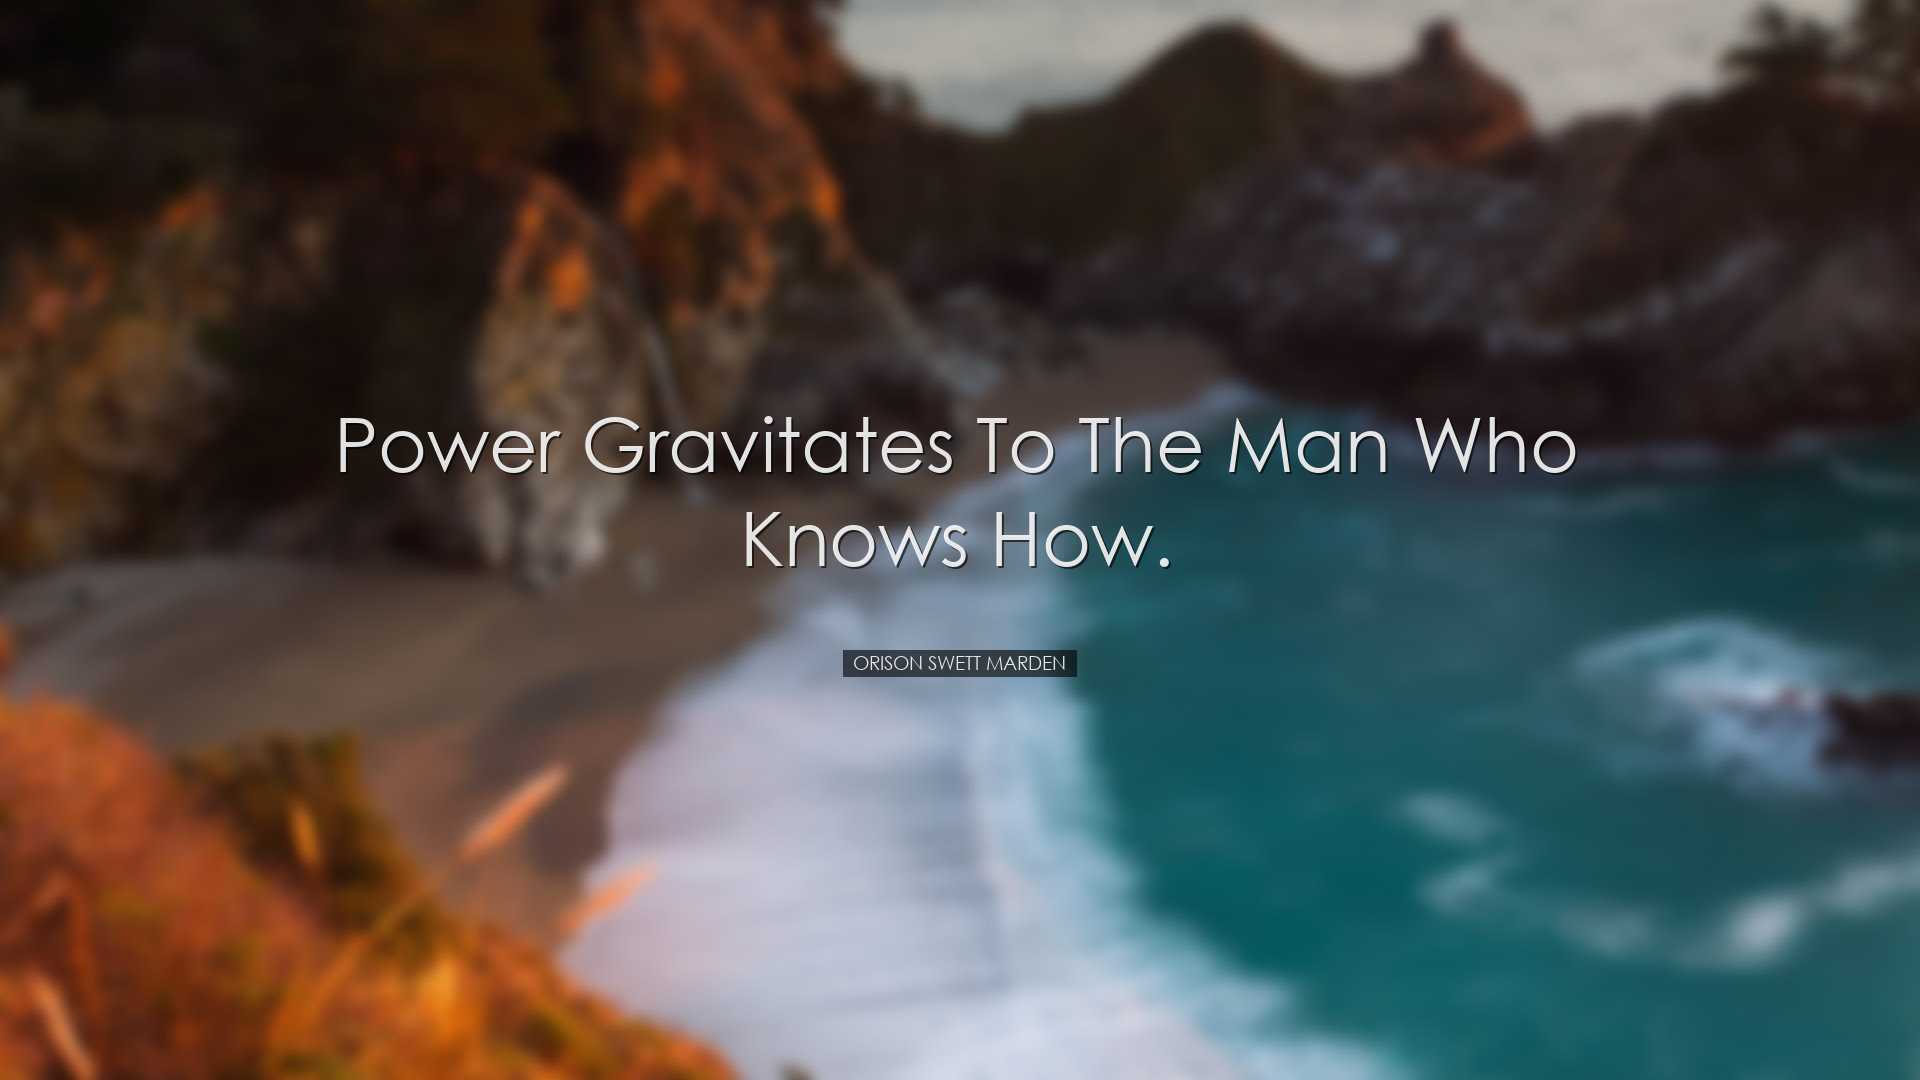 Power gravitates to the man who knows how. - Orison Swett Marden